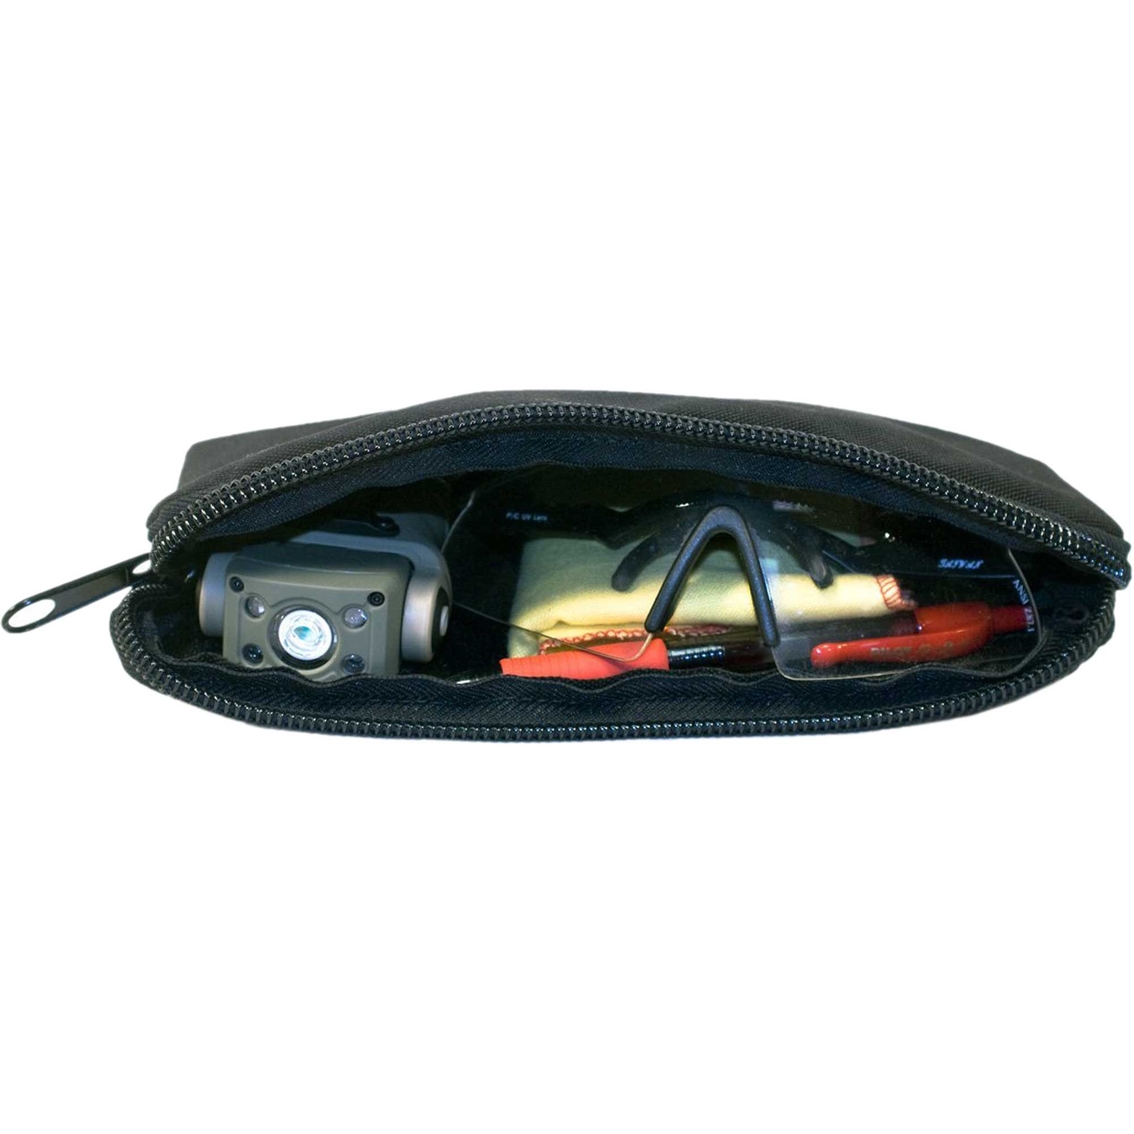 Elite Survival Tactical Systems Ammunition/Accessory Pouch - Image 3 of 3